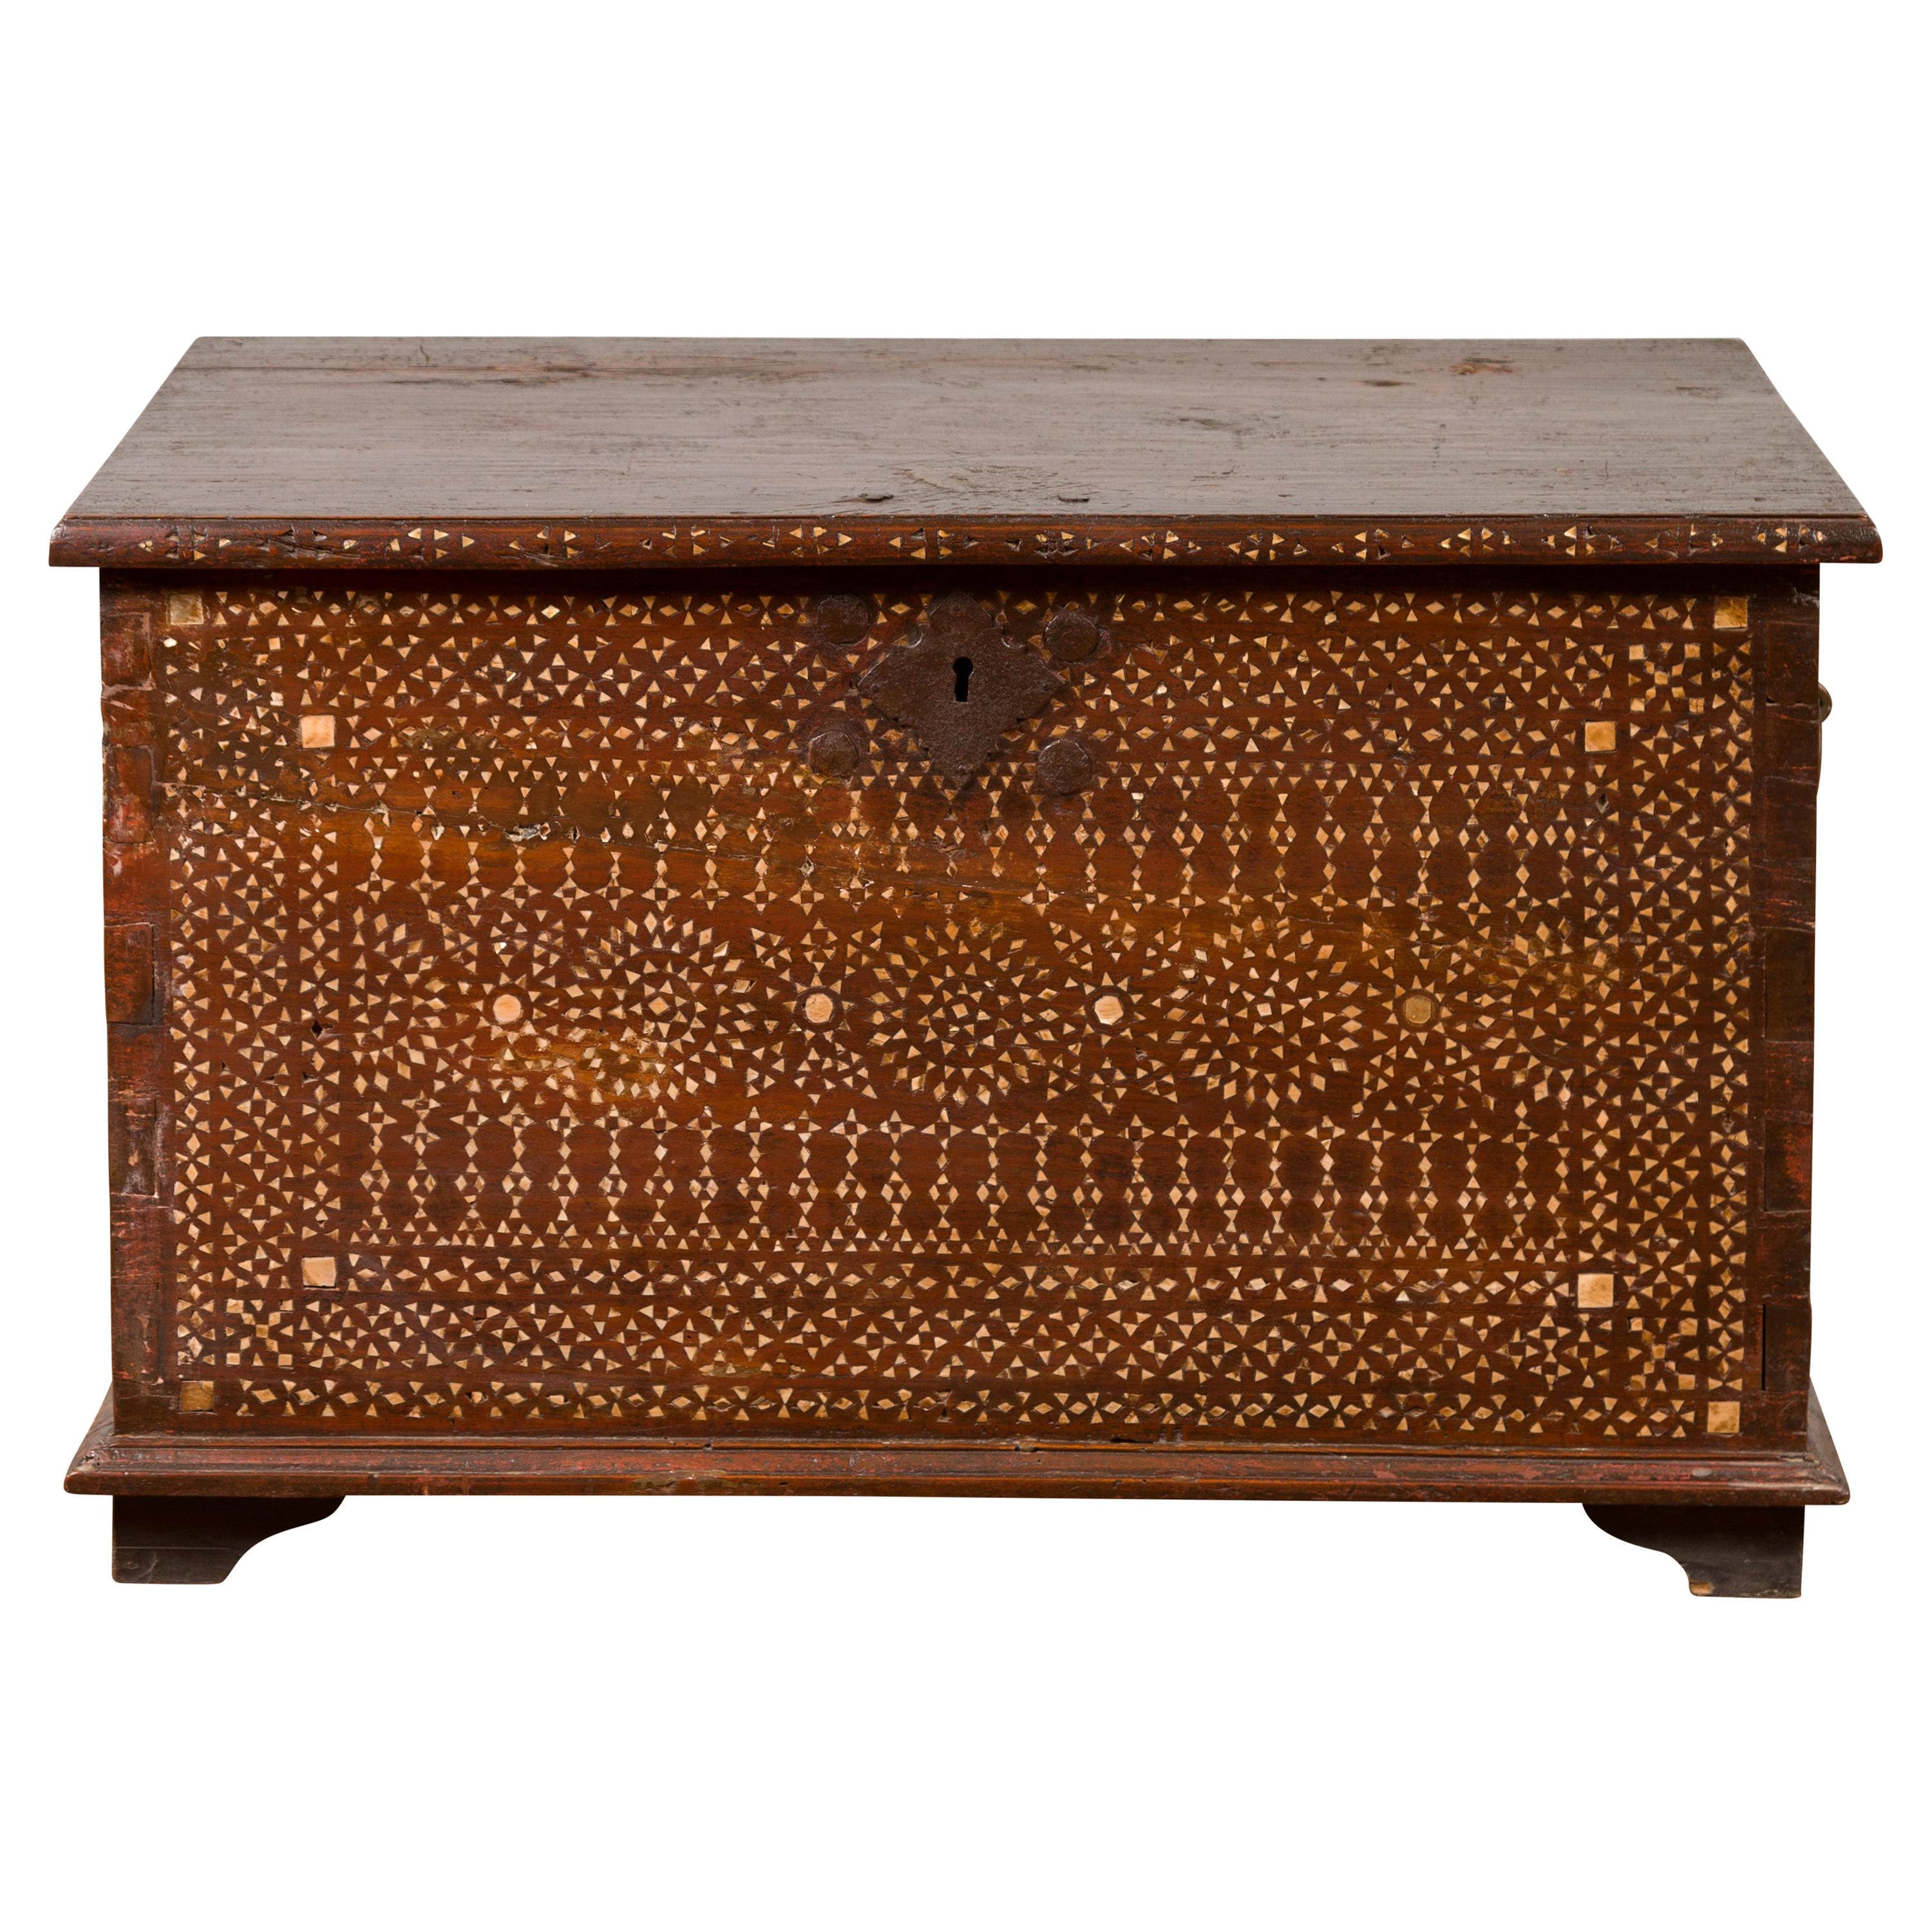 Early 20th Century Wooden Blanket Chest from Jakarta with Mother of Pearl Inlay